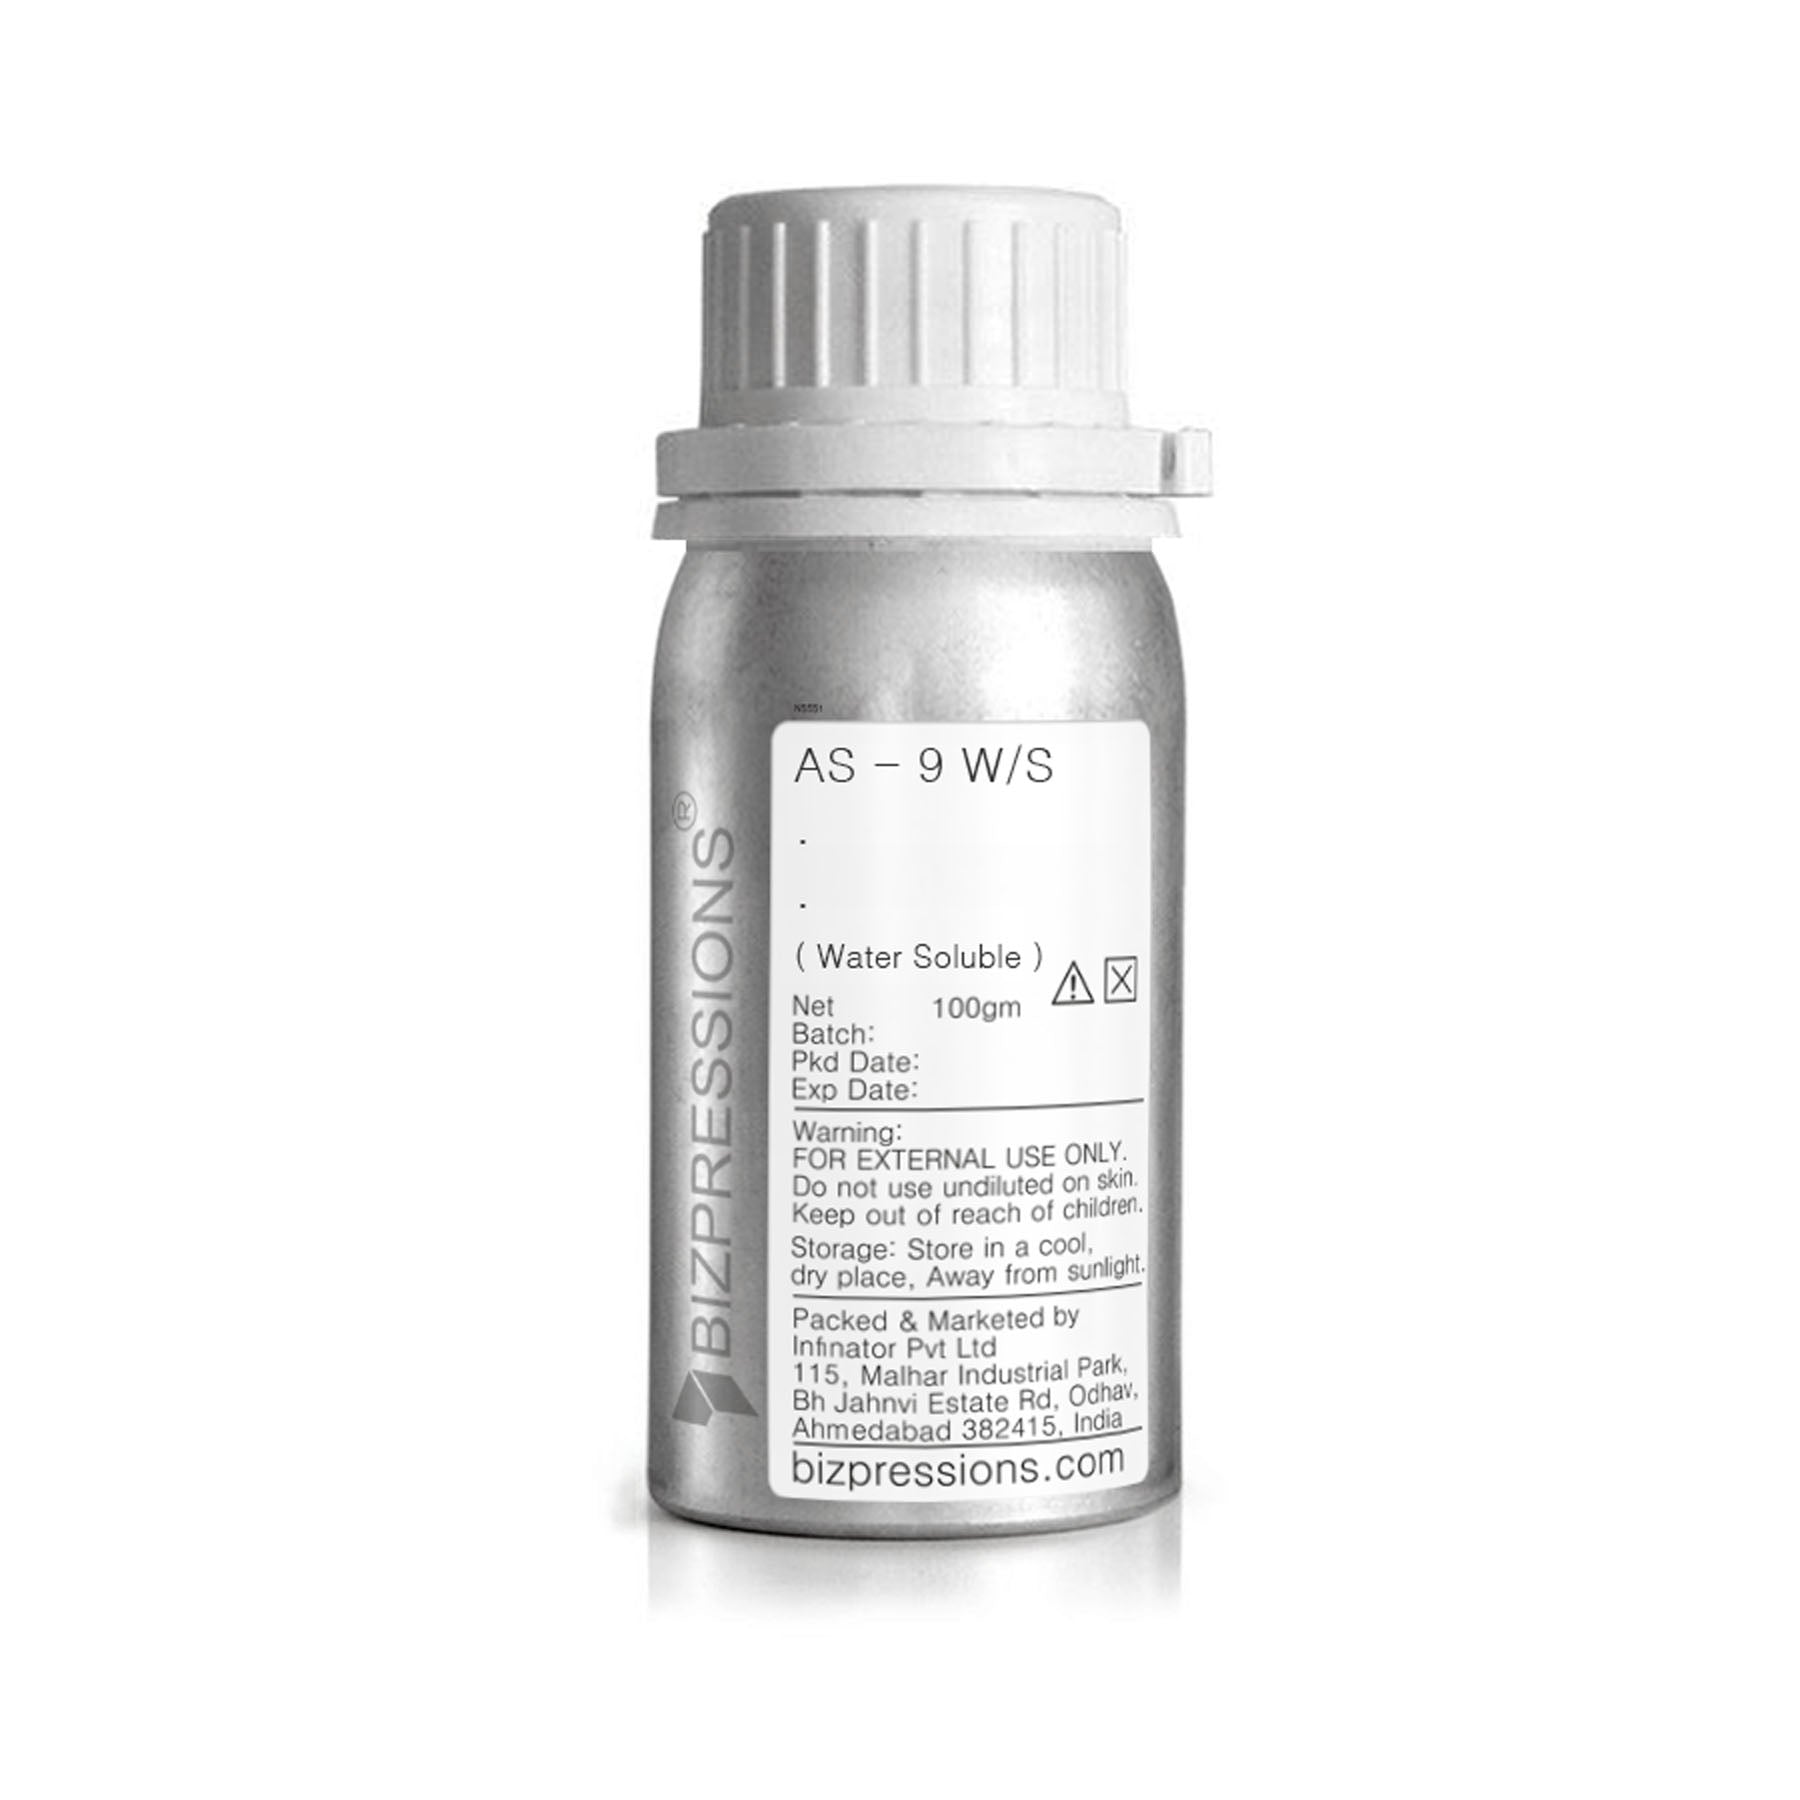 AS - 9 W/S - Fragrance ( Water Soluble ) - 100 gm